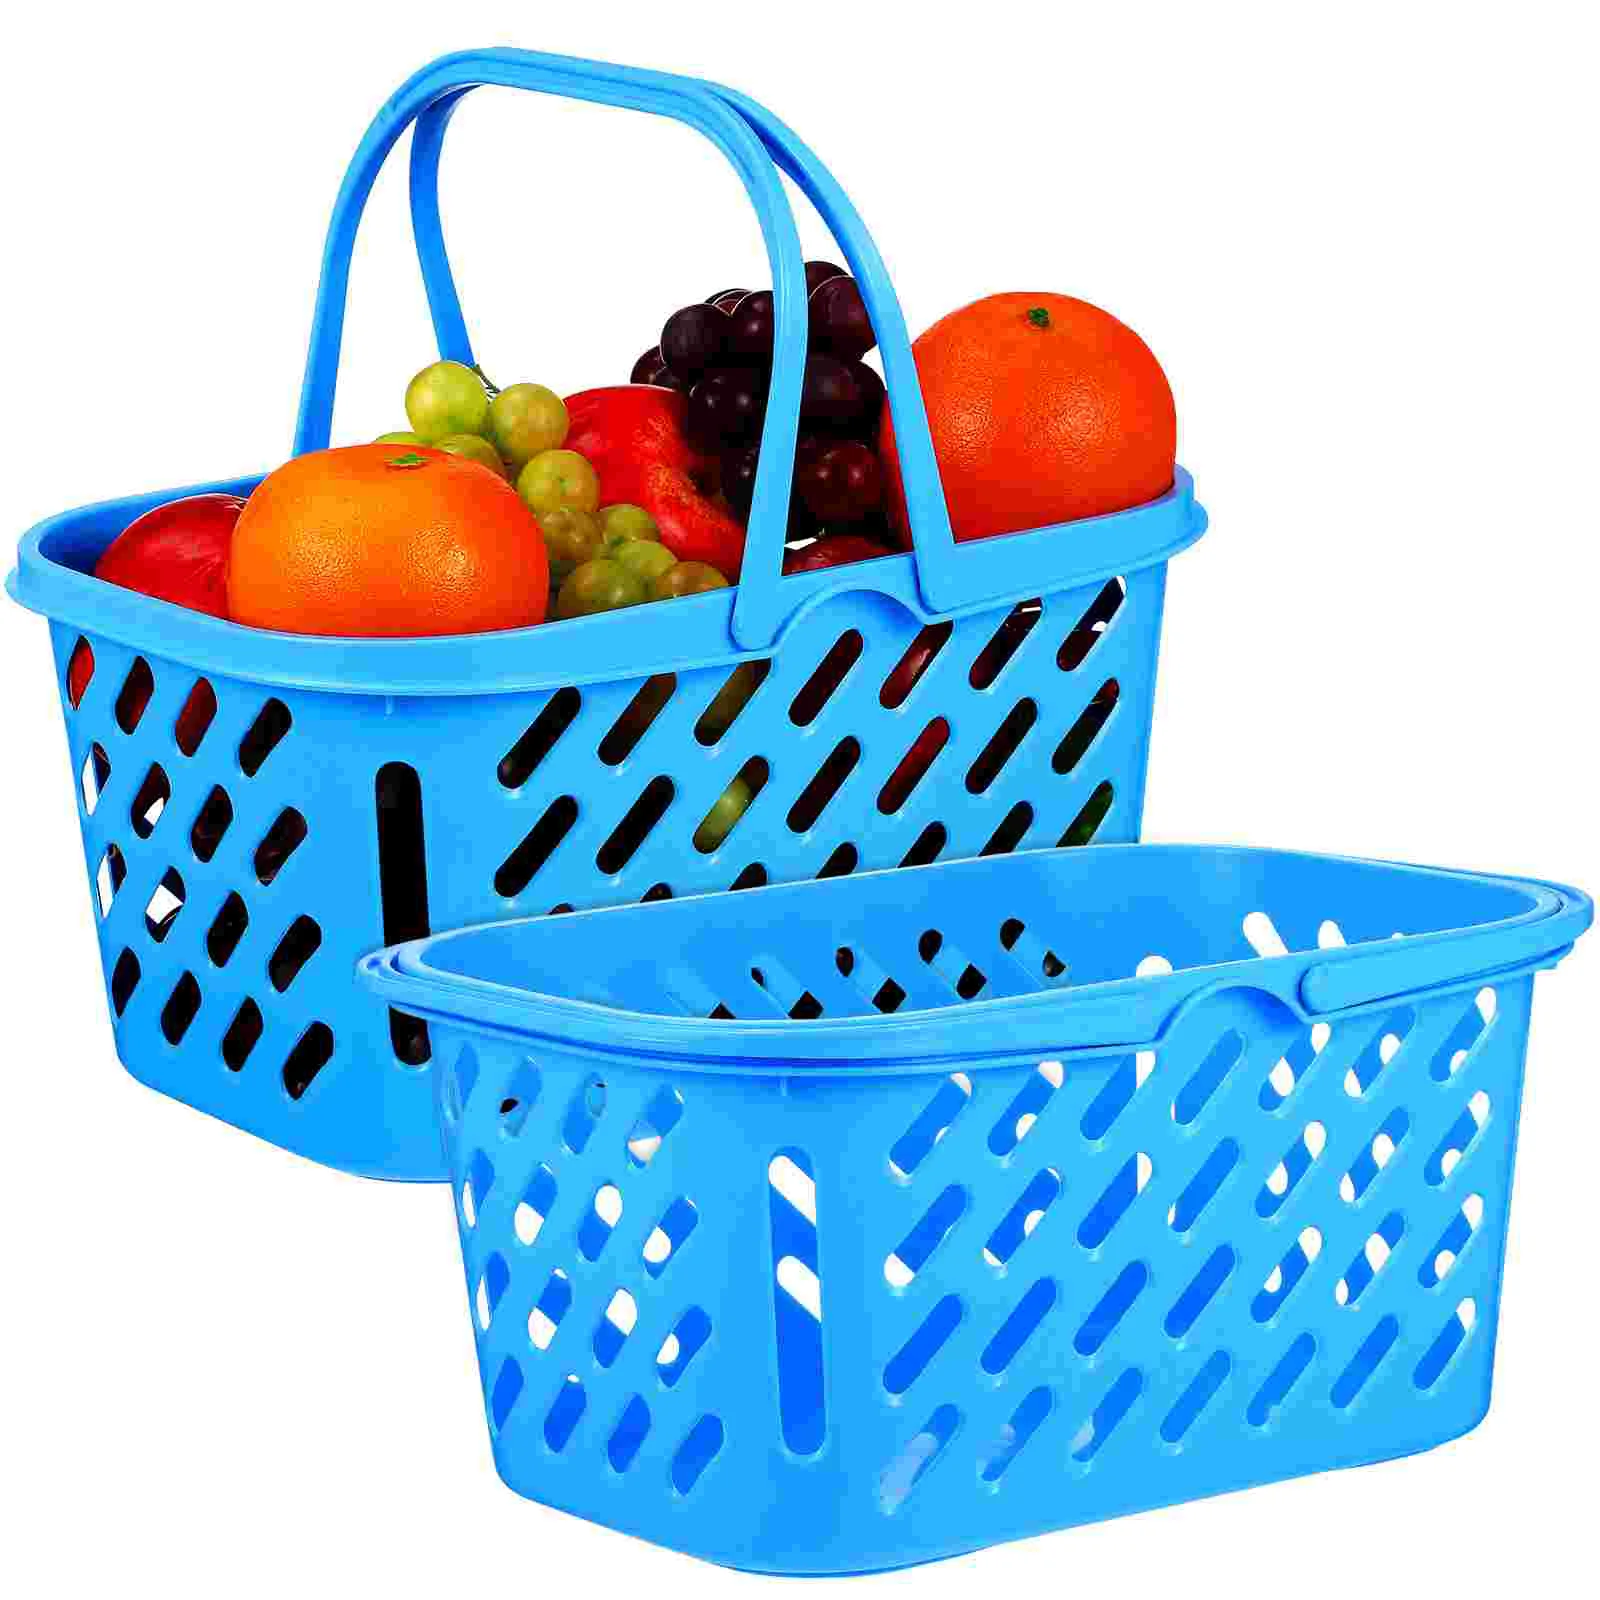 

2 Pcs Mini Plastic Basket Small Shopping Kids Grocery Container Containers Storage Baskets Handle Toy Home Bin Thicken